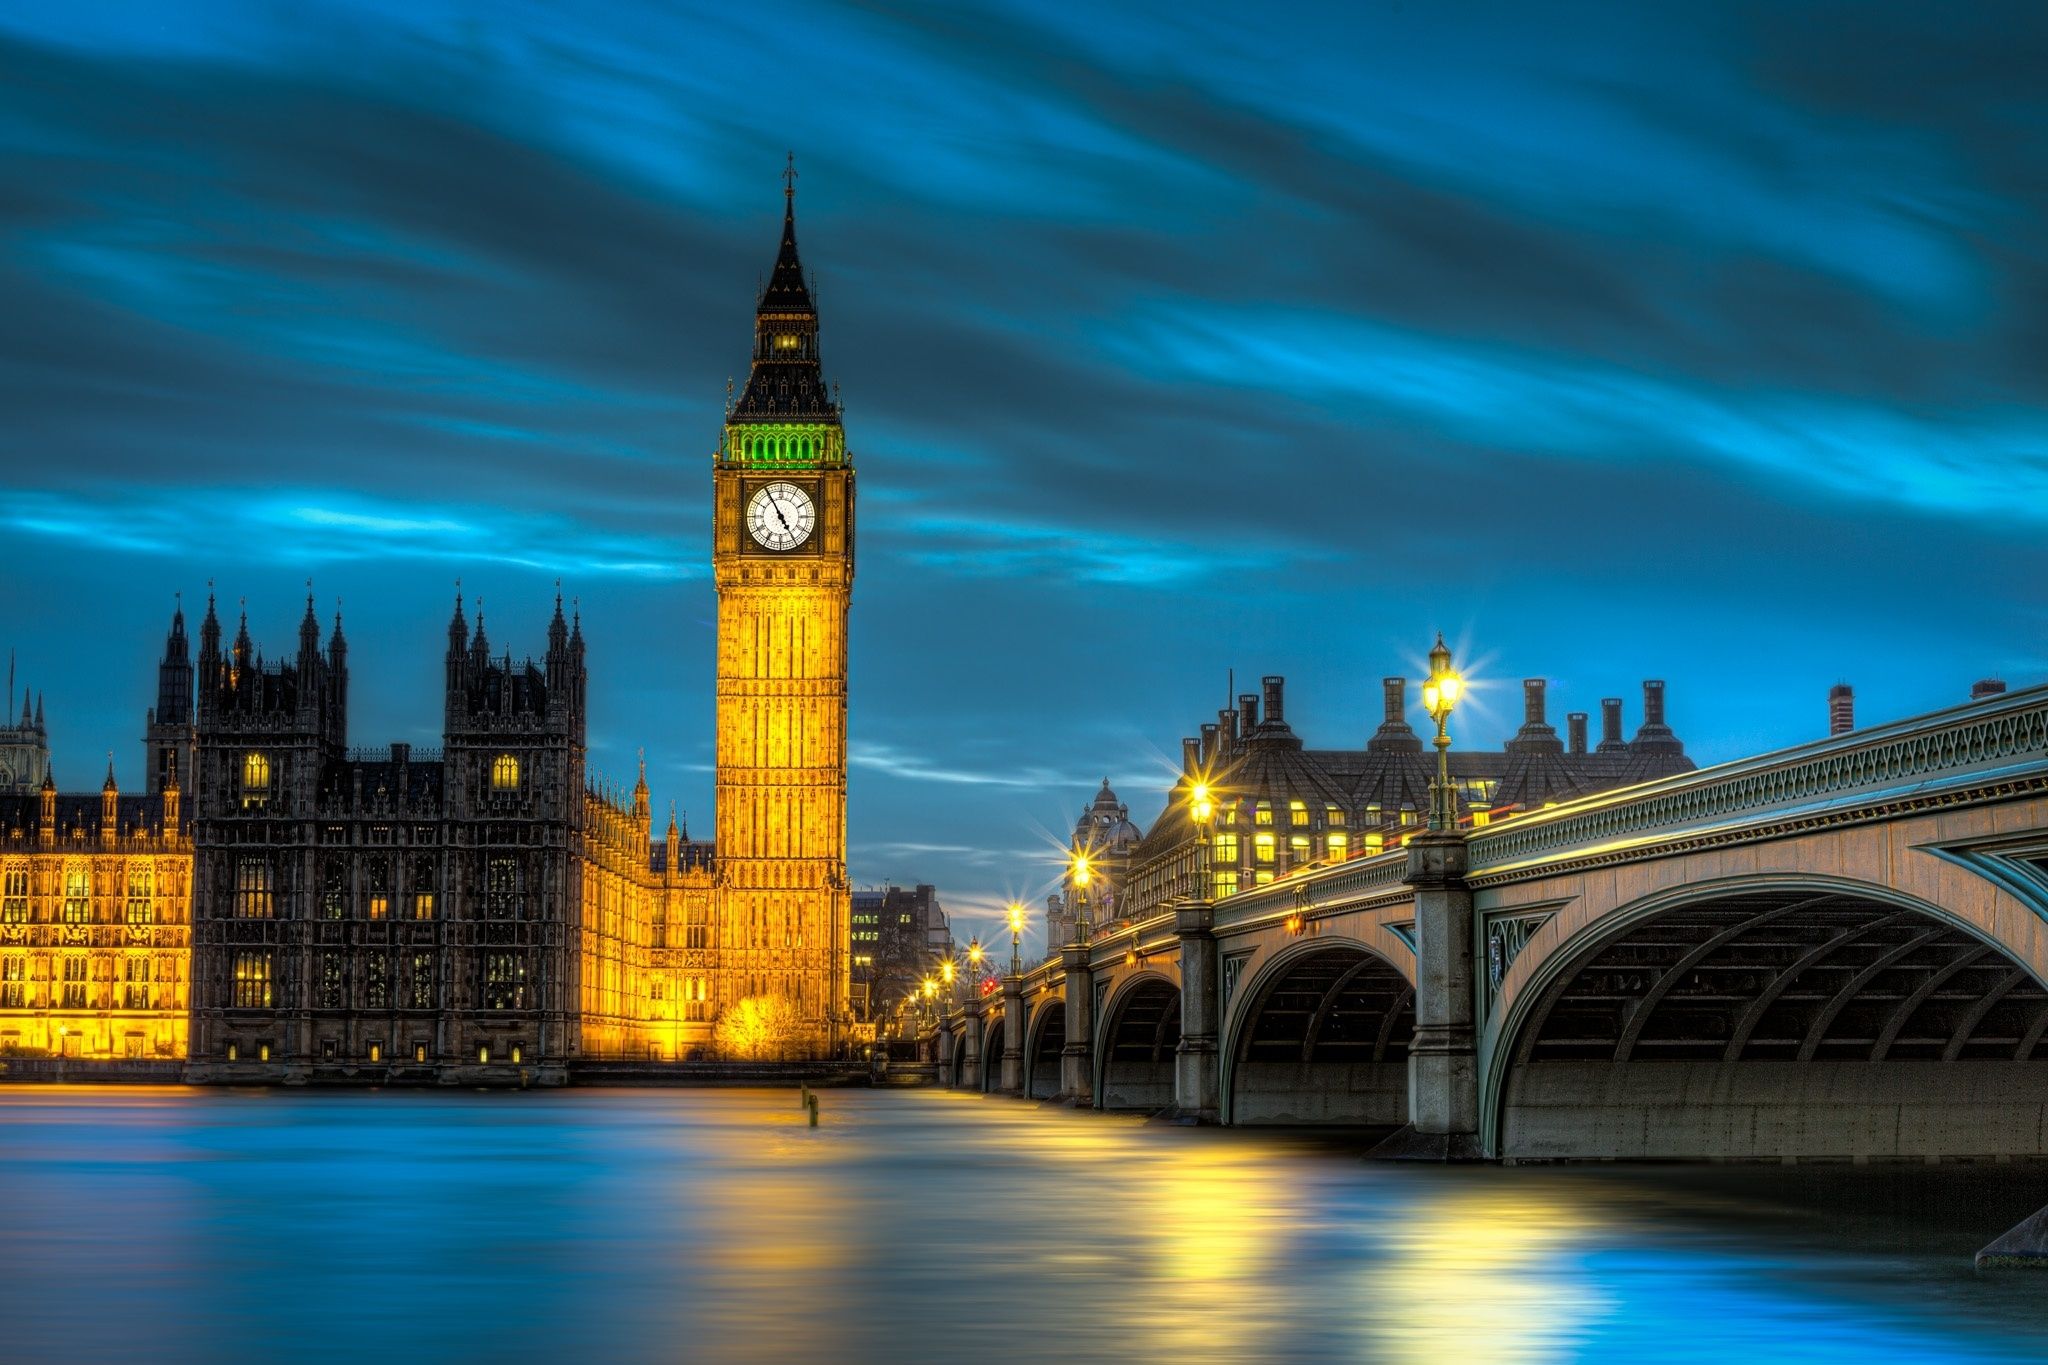 palace of westminster, london, man made, big ben, light, night, monuments